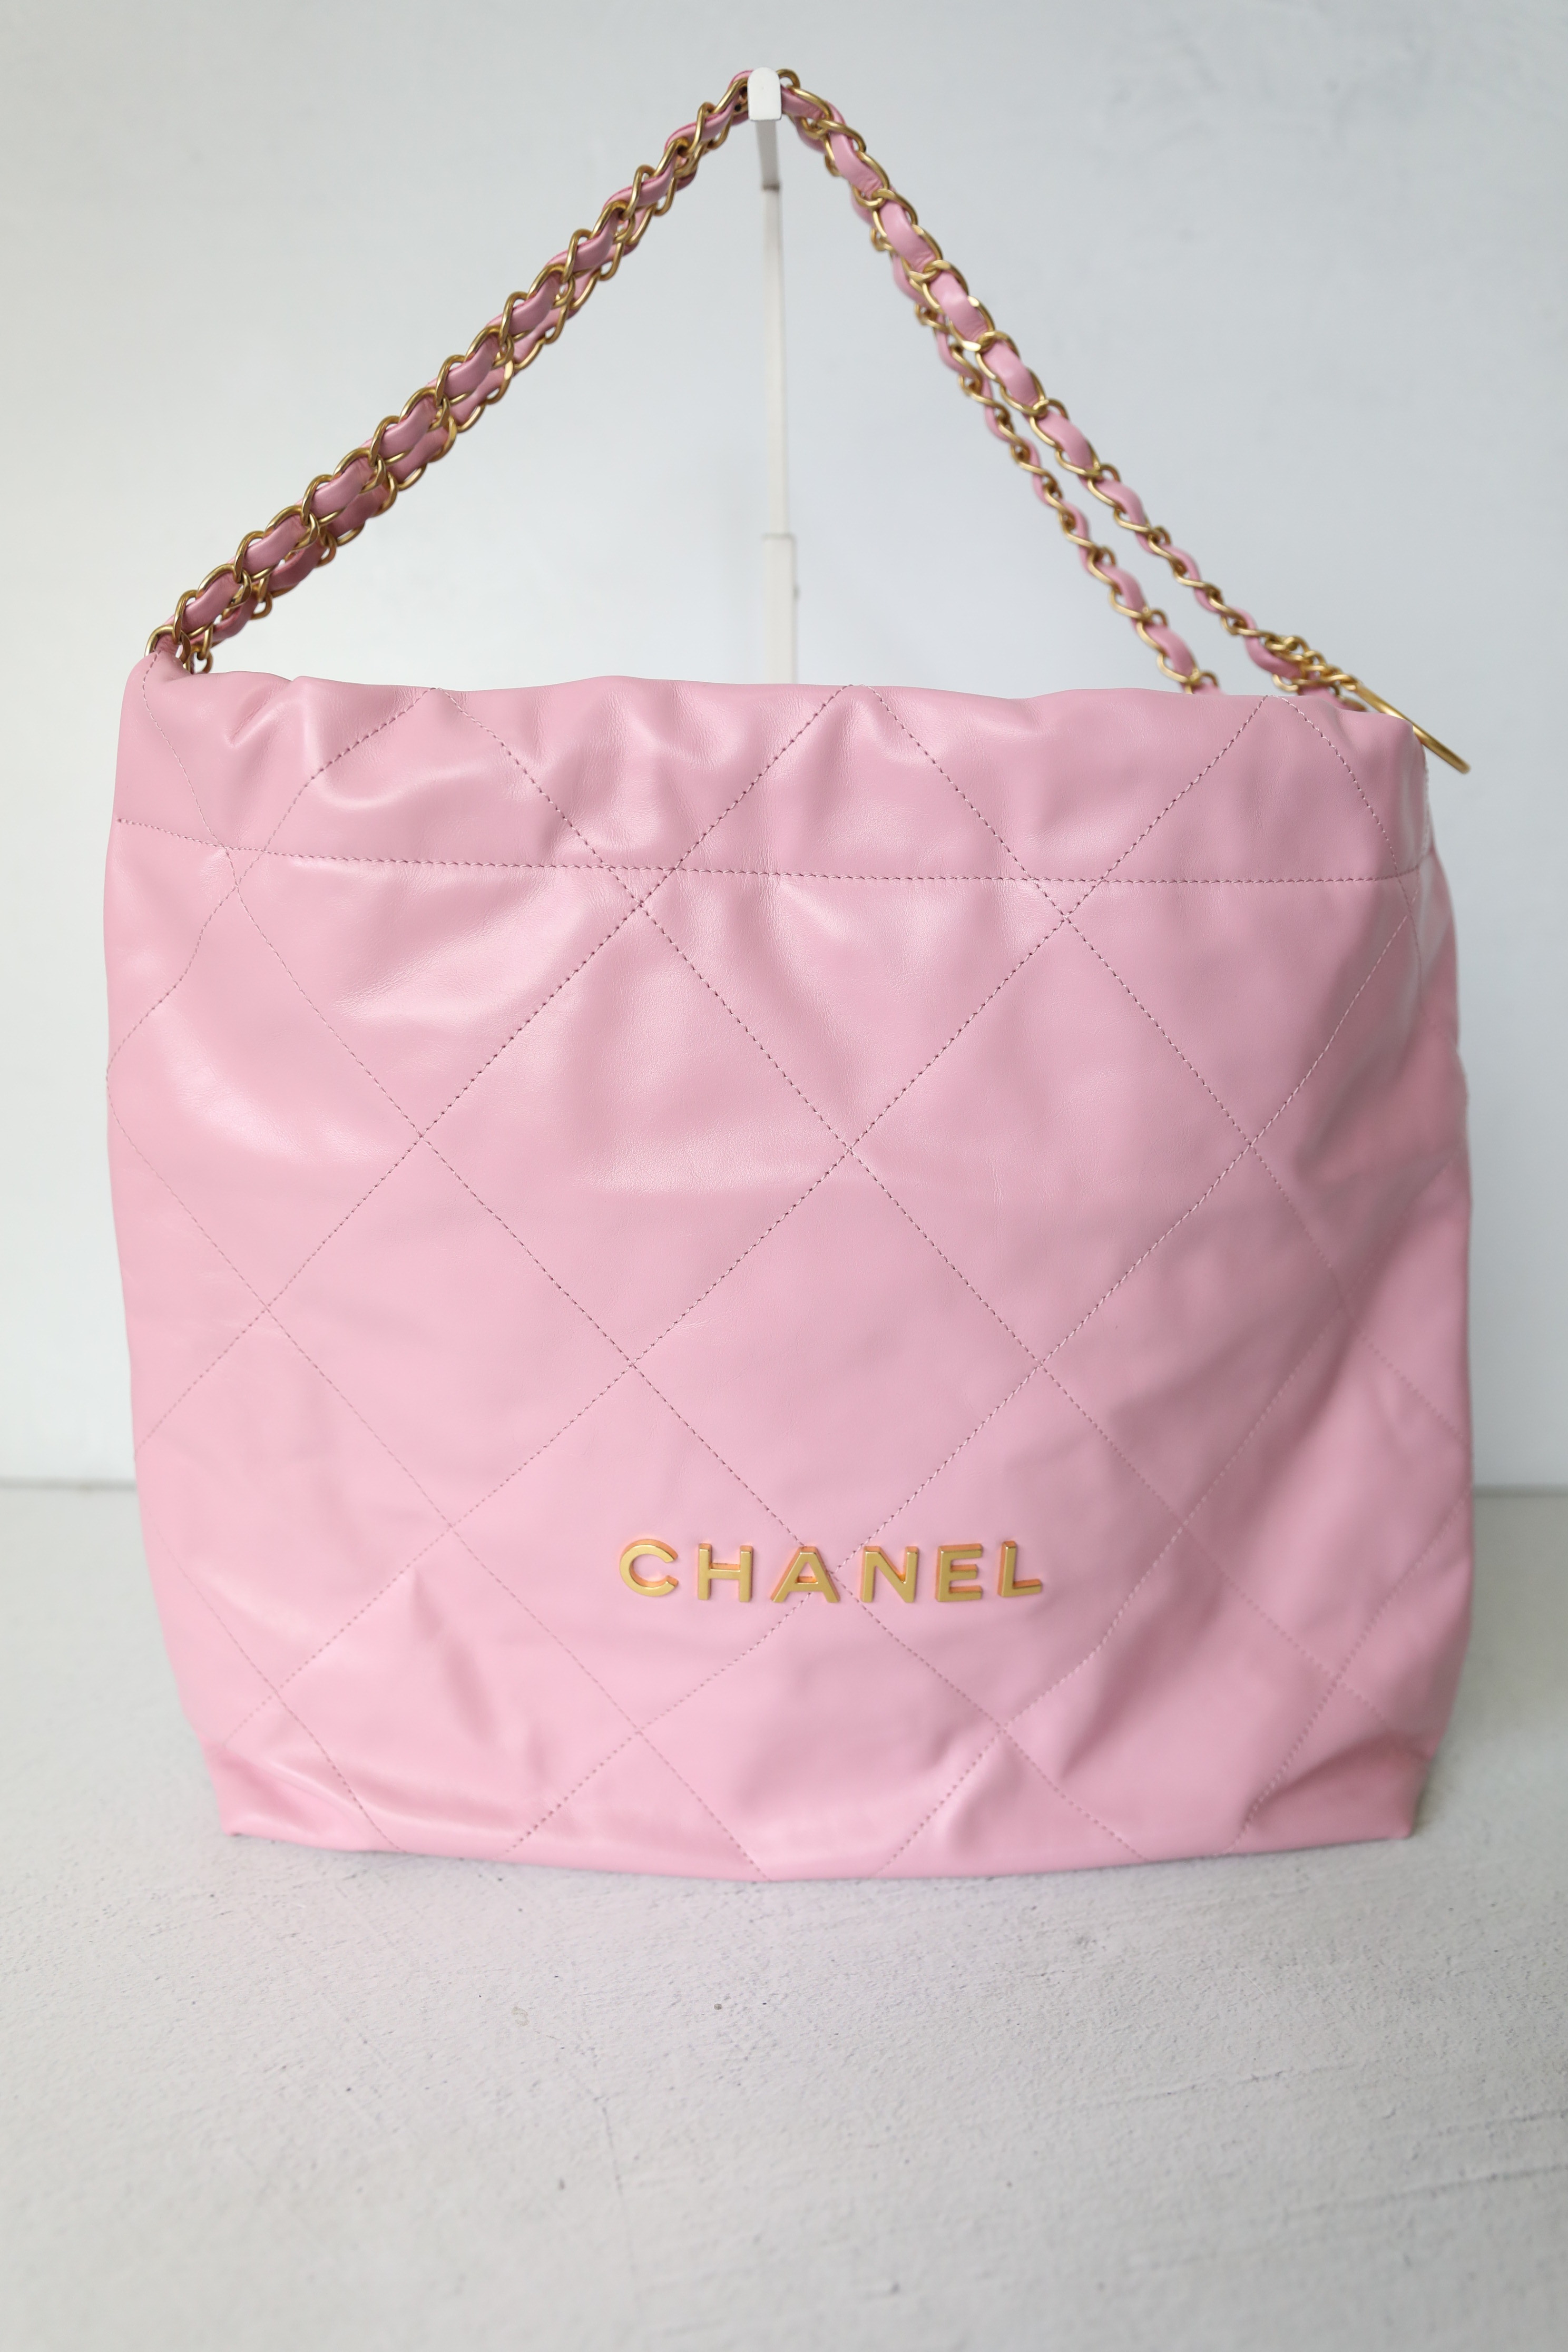 Chanel 22 Tote Medium, Pink Leather with Gold Hardware